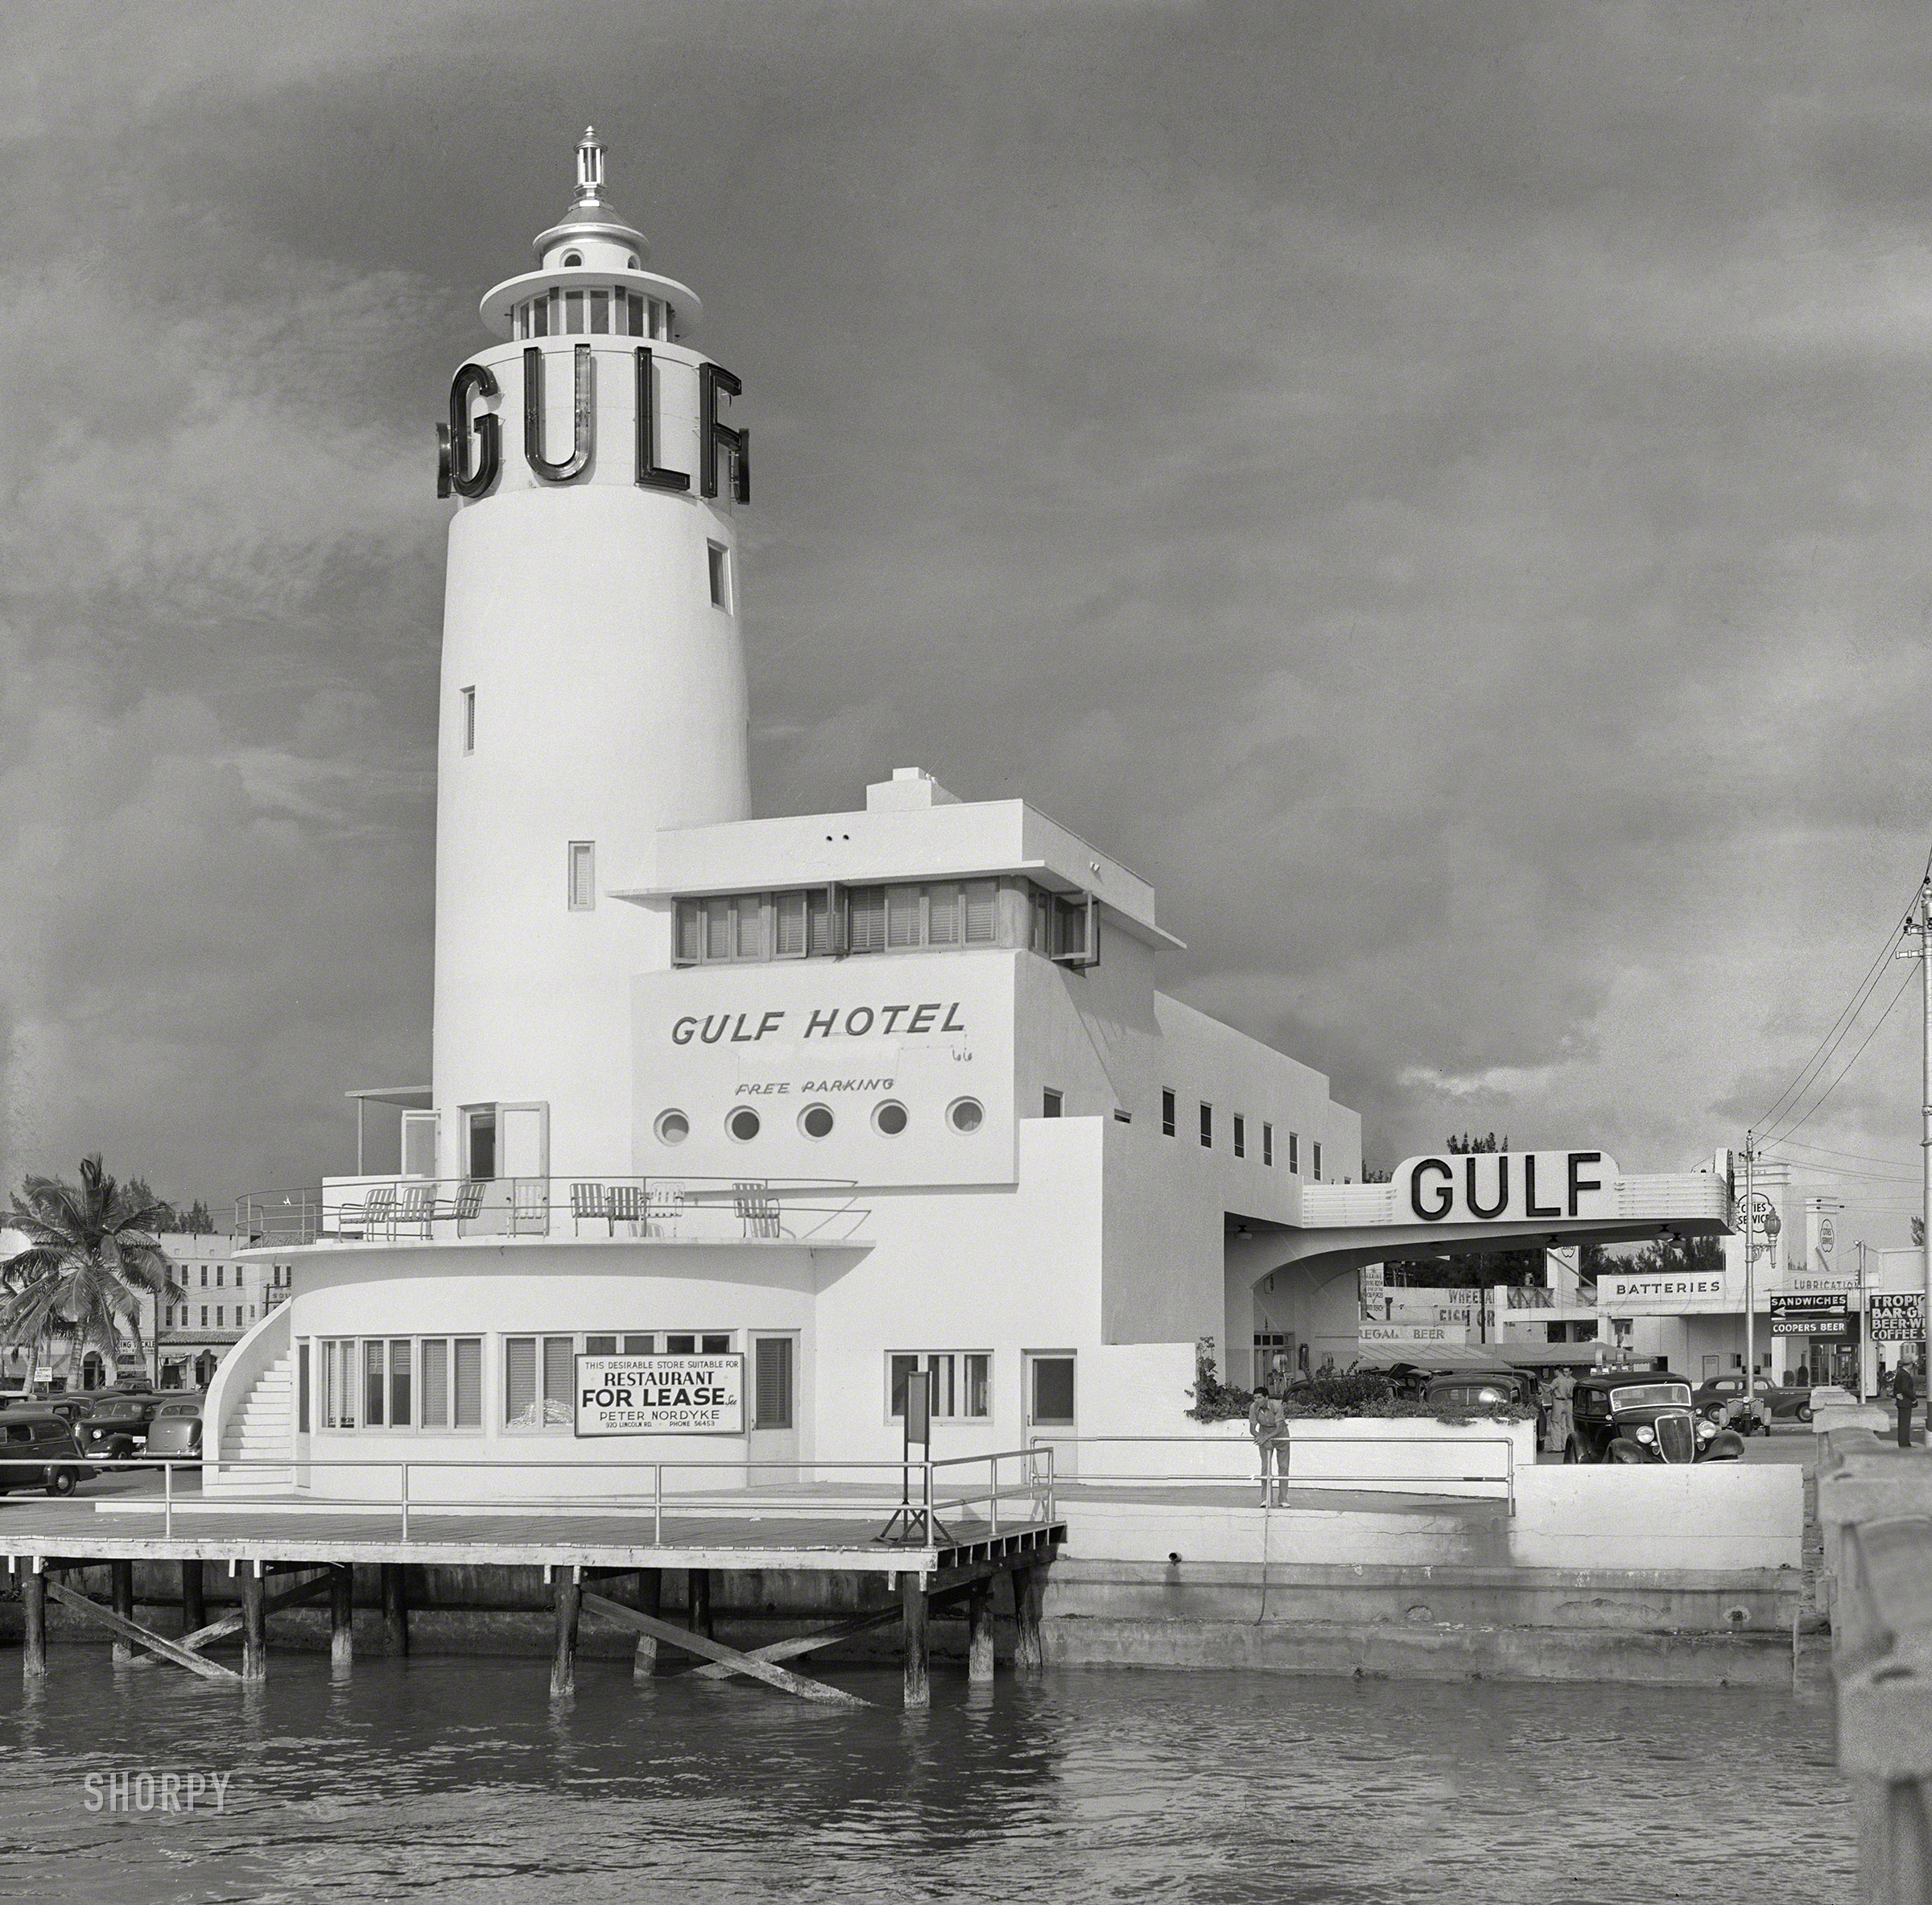 &nbsp; &nbsp; &nbsp; &nbsp; The Gulf Hotel building (and lighthouse) at 1315 Fifth Street.
April 1939. "Even the gas stations in Miami Beach are on an elaborate scale, often modern design, resembling hotels." Composite of two photos by Marion Post Wolcott for the Farm Security Administration. View full size.